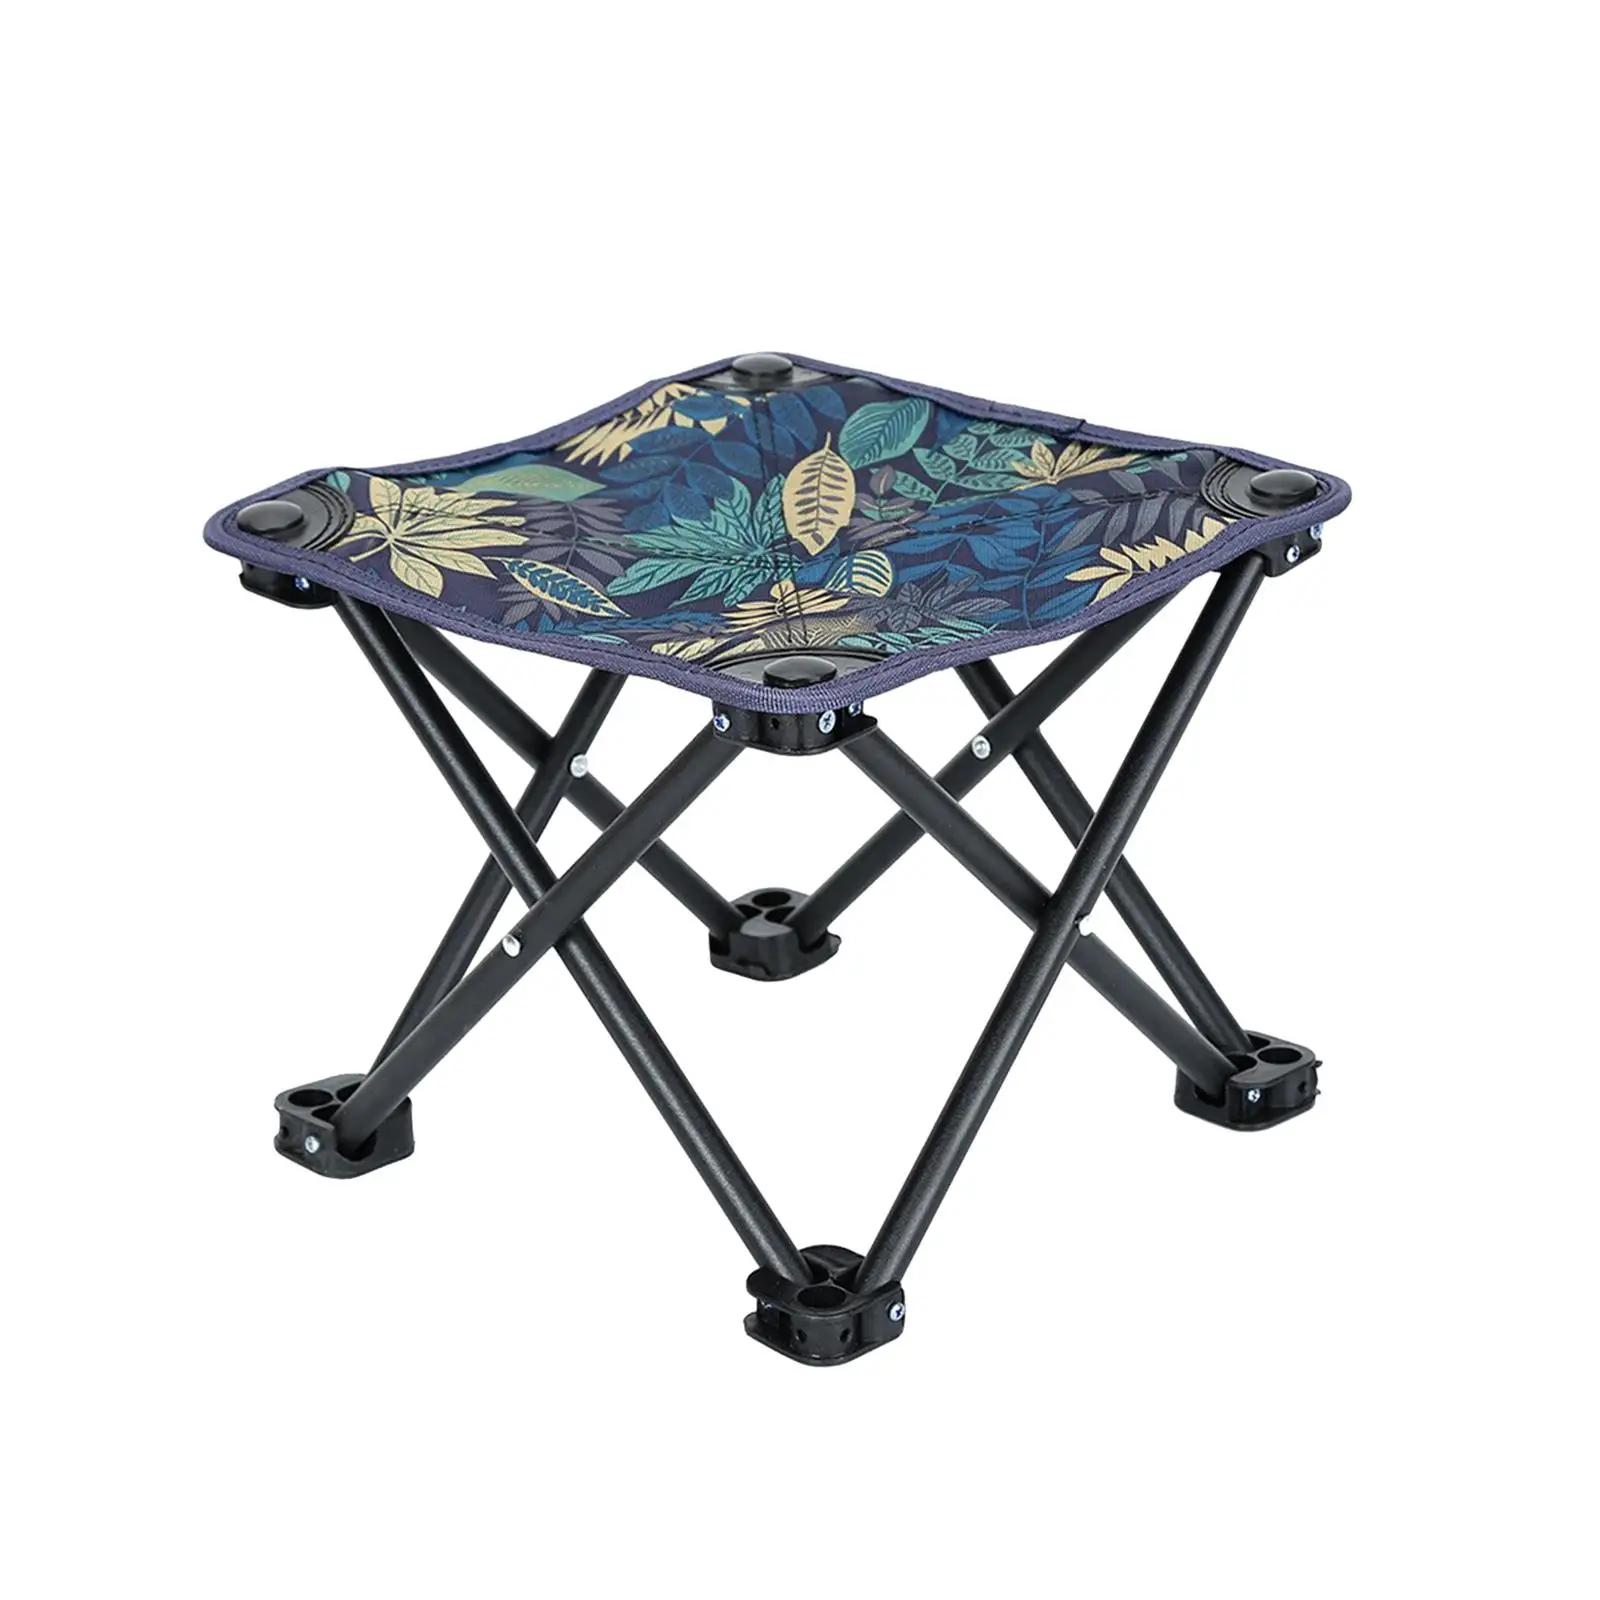 Camping Stool Practical Heavy Duty Folded Wear Resistant Folding Stool Chair for - £15.56 GBP